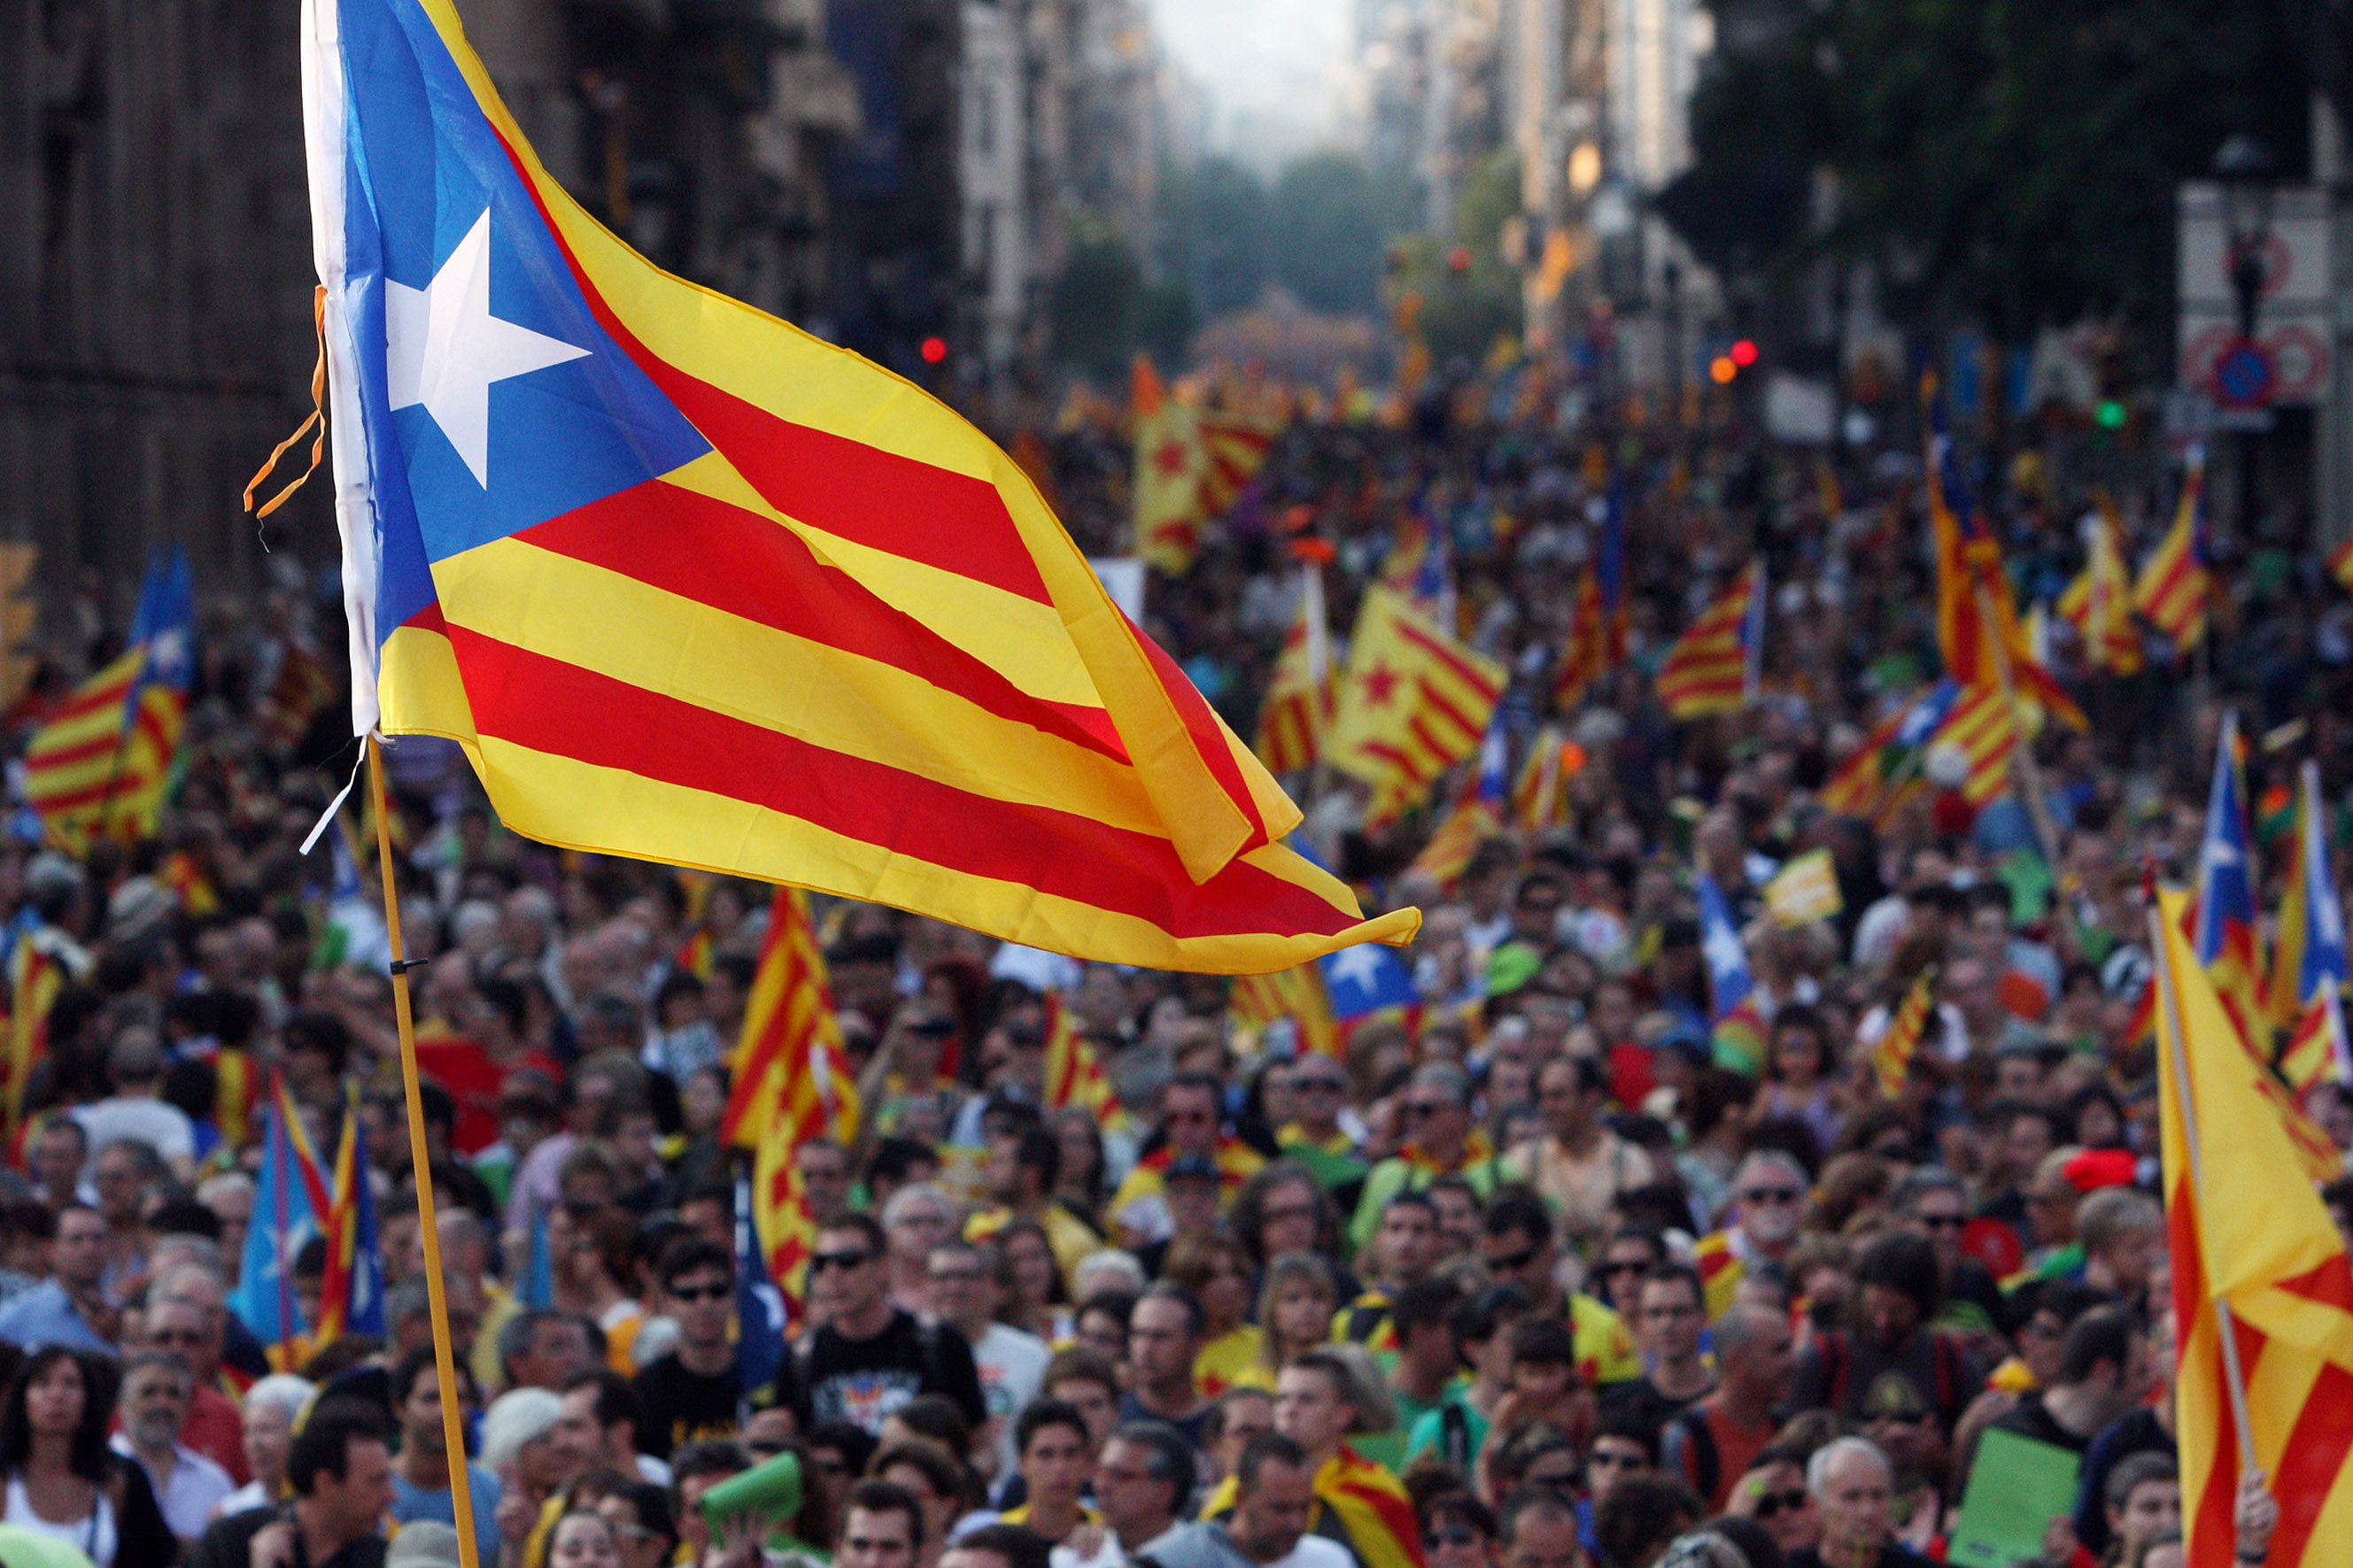 Pro-independence rally on Catalonia's National Day, on September 11, 2012 (by Oriol Campuzano)